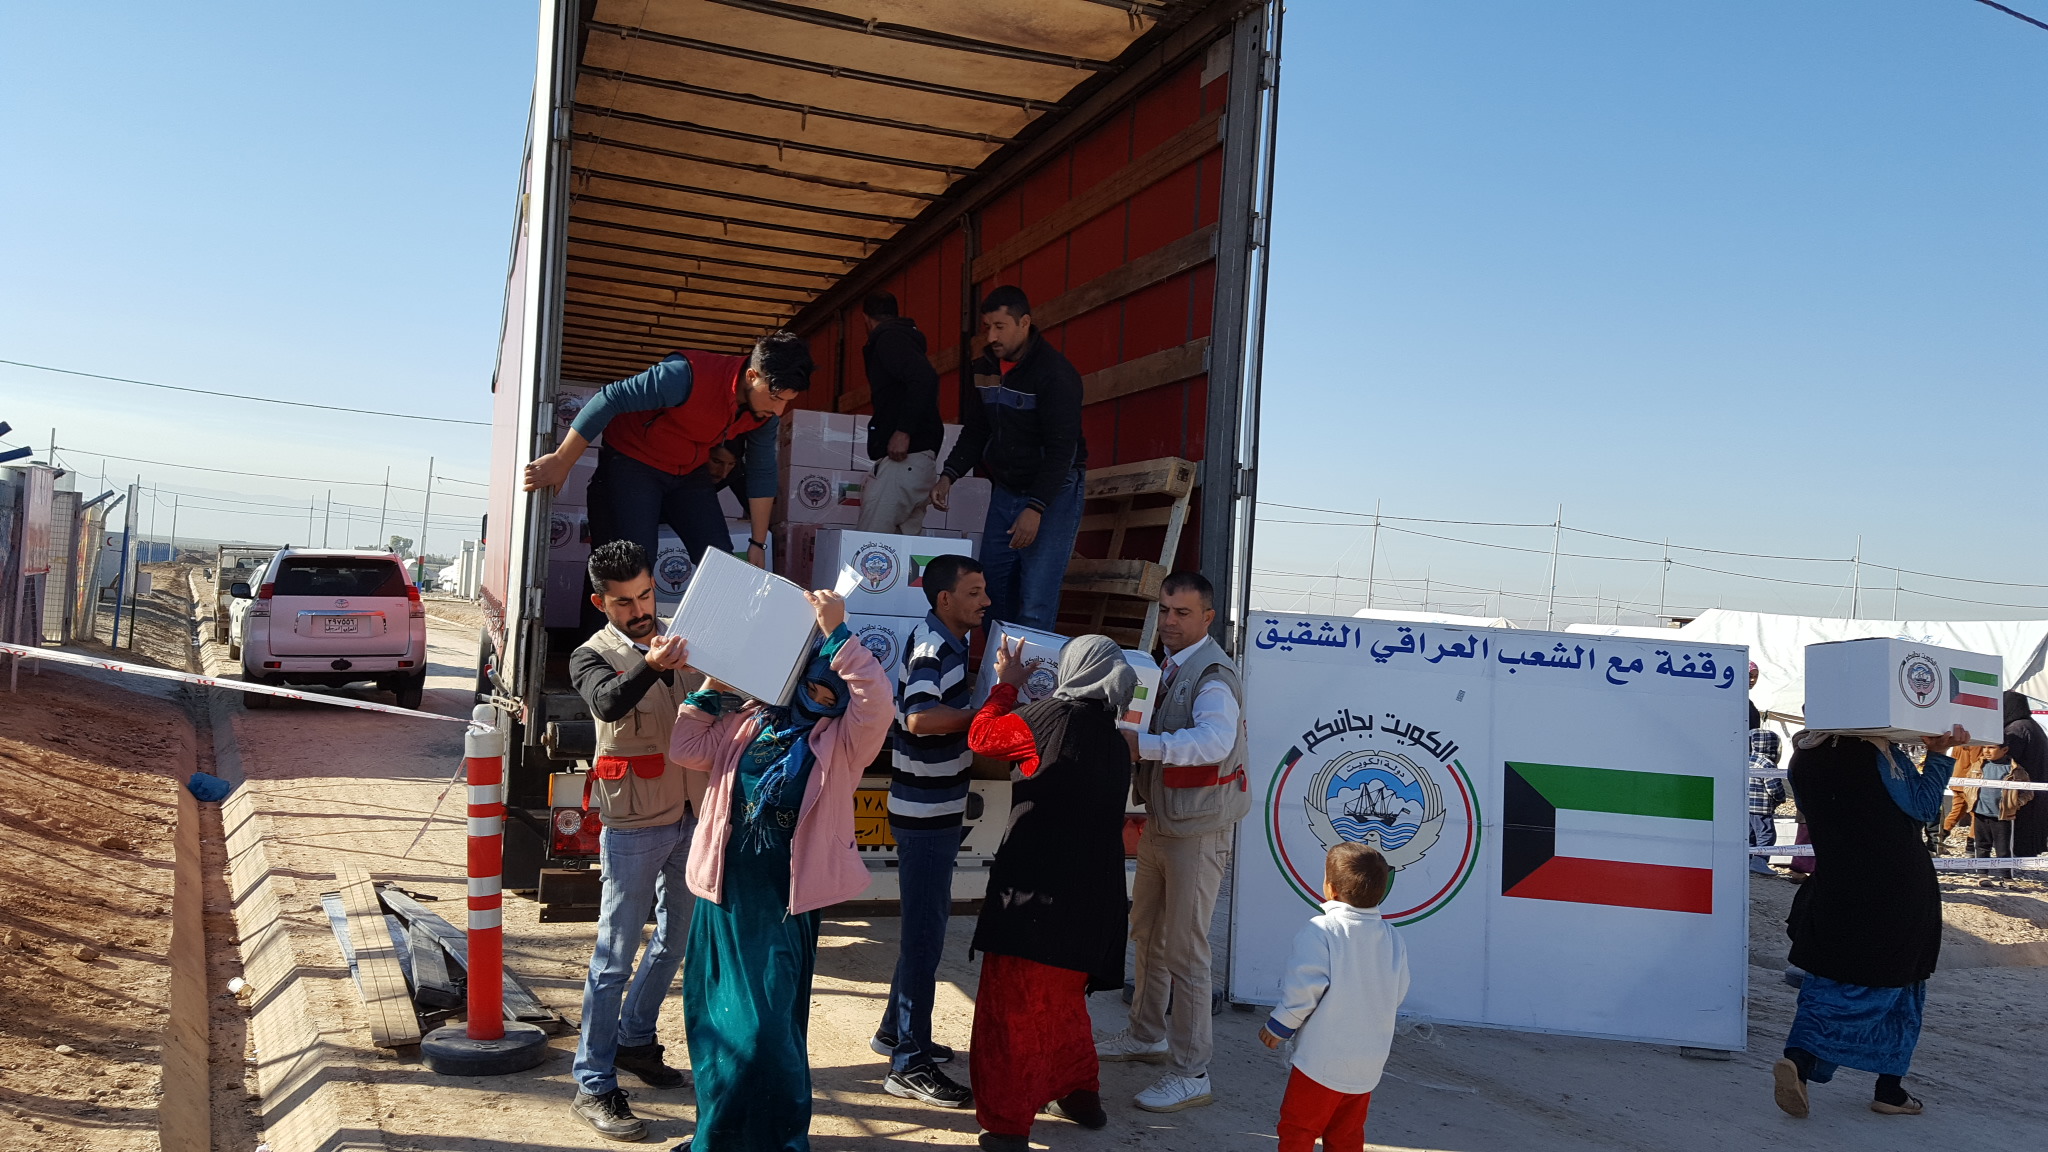 Kuwait hands over food baskets to 25,000 displaced Iraqis in Irbil